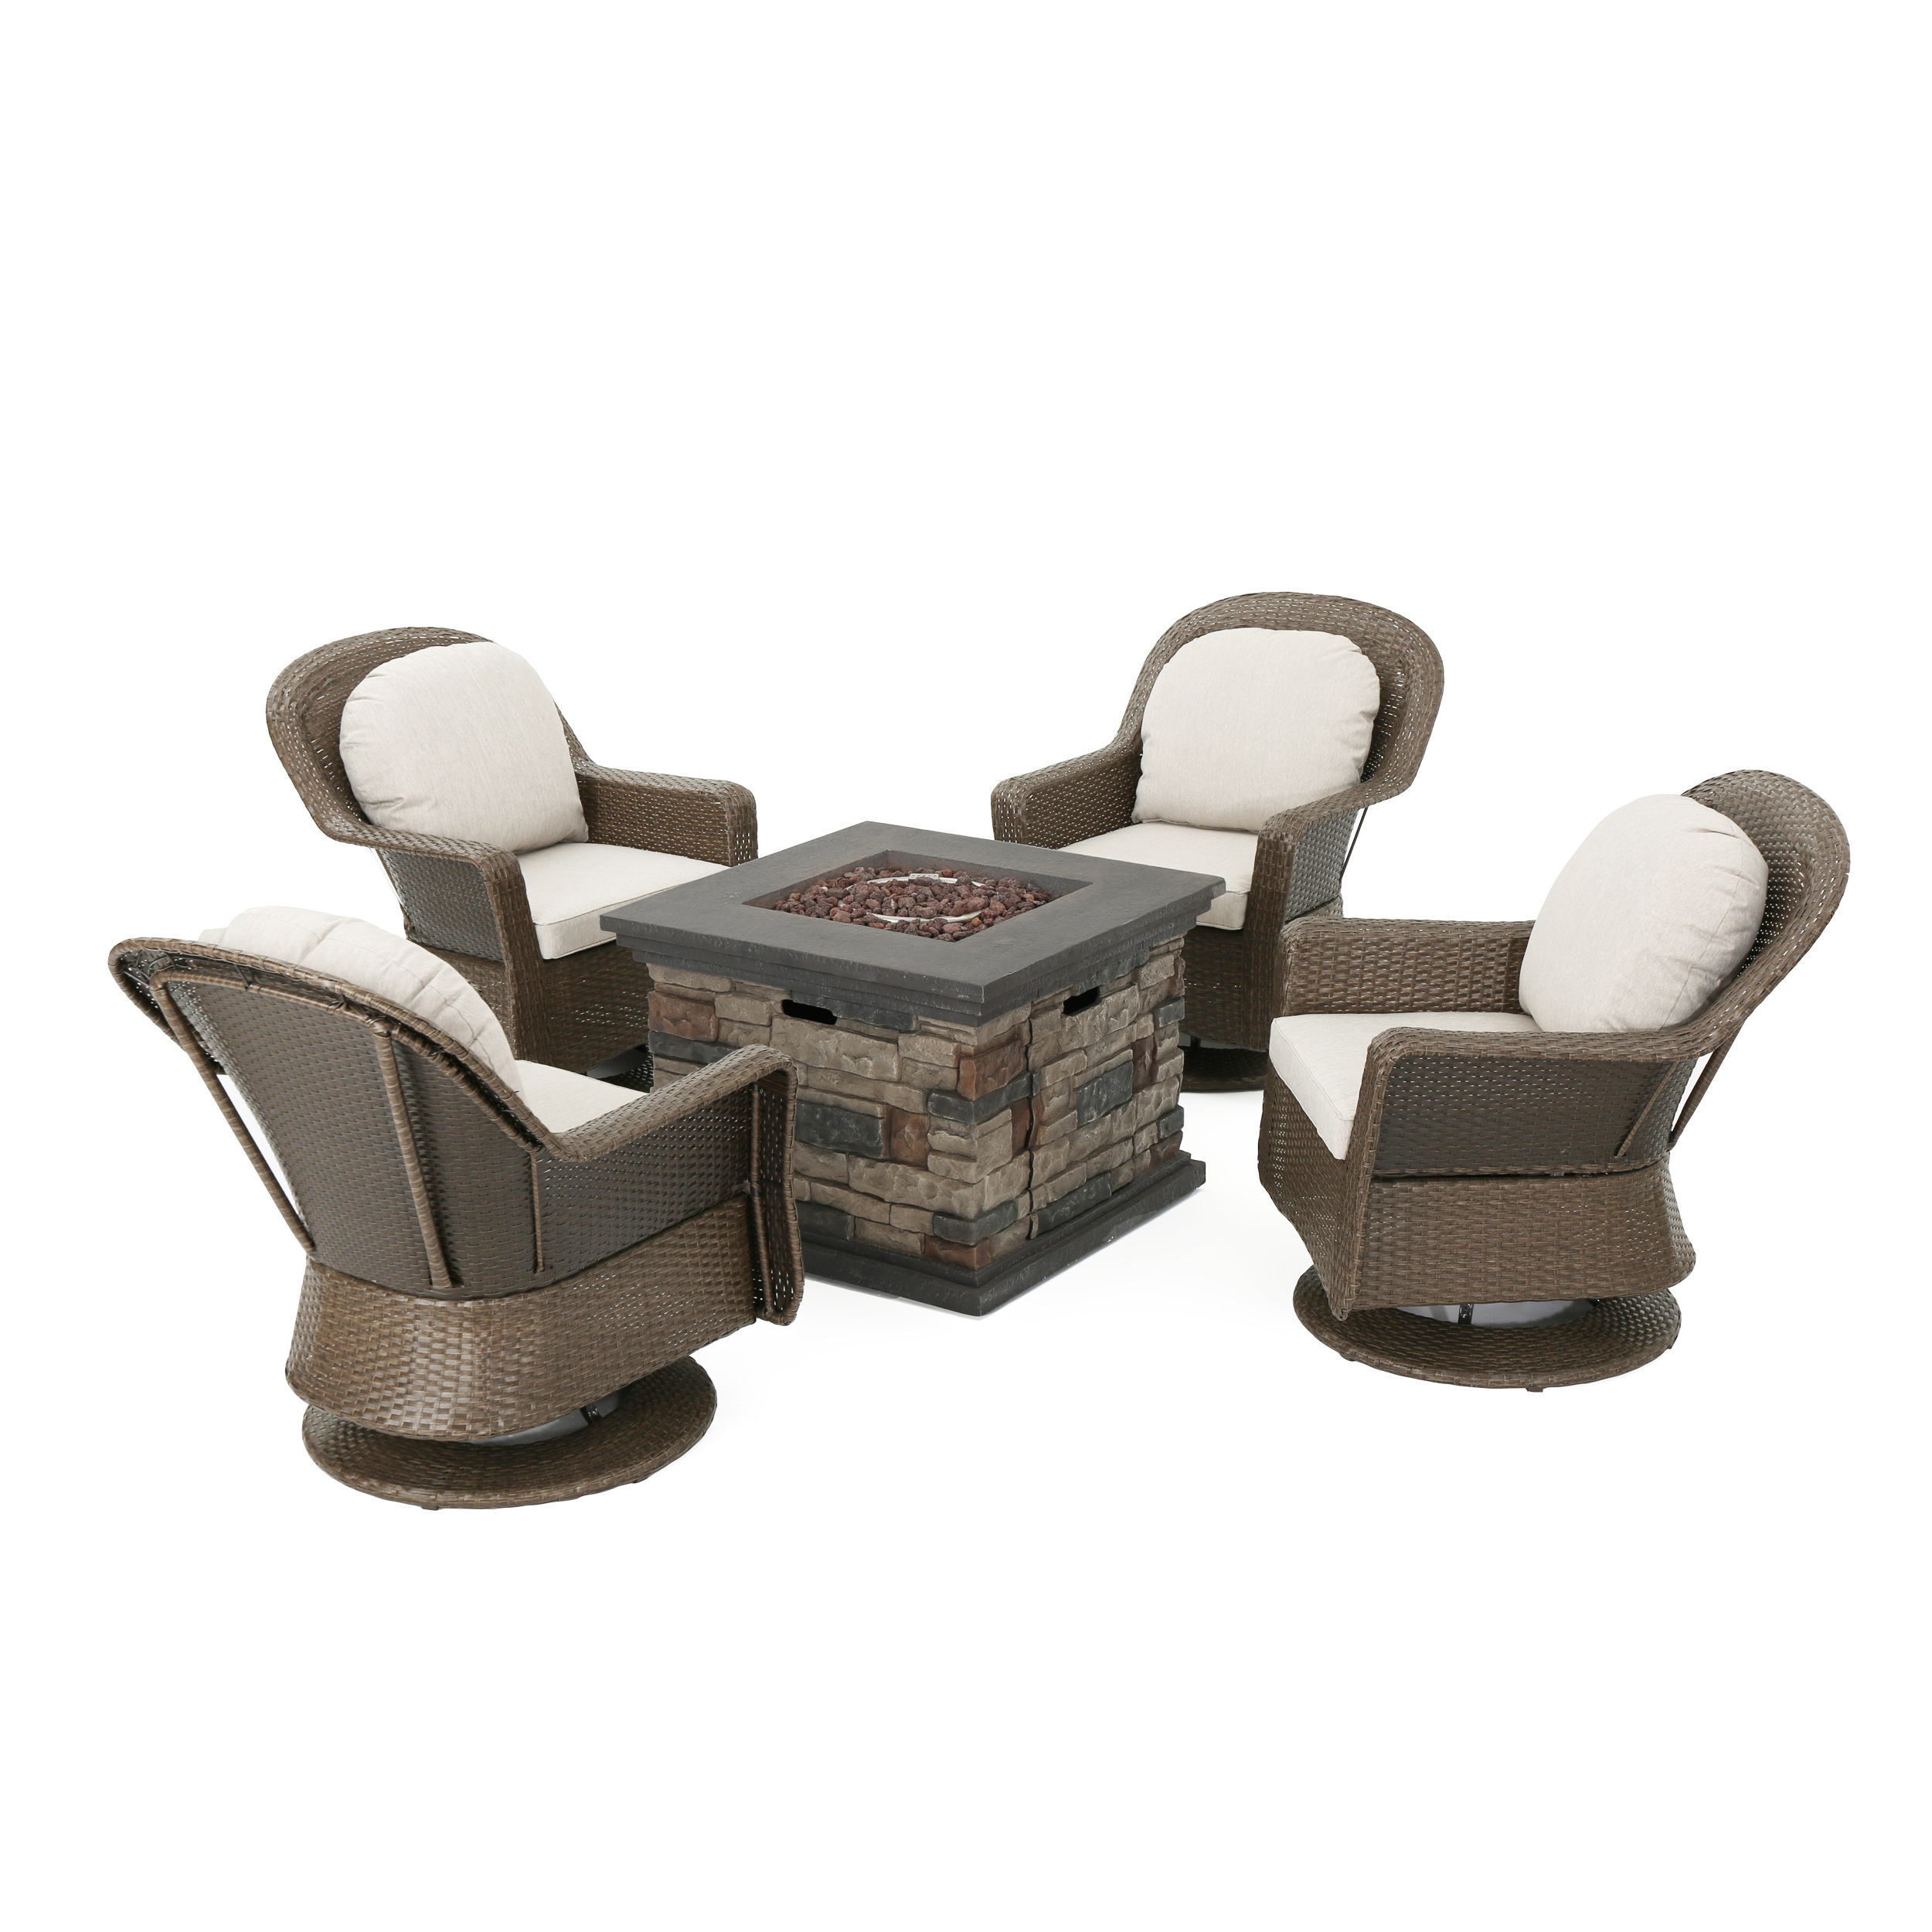 Noble House Alhambra 5 Piece Outdoor Swivel Chair and Firepit Set in Brown - image 2 of 12